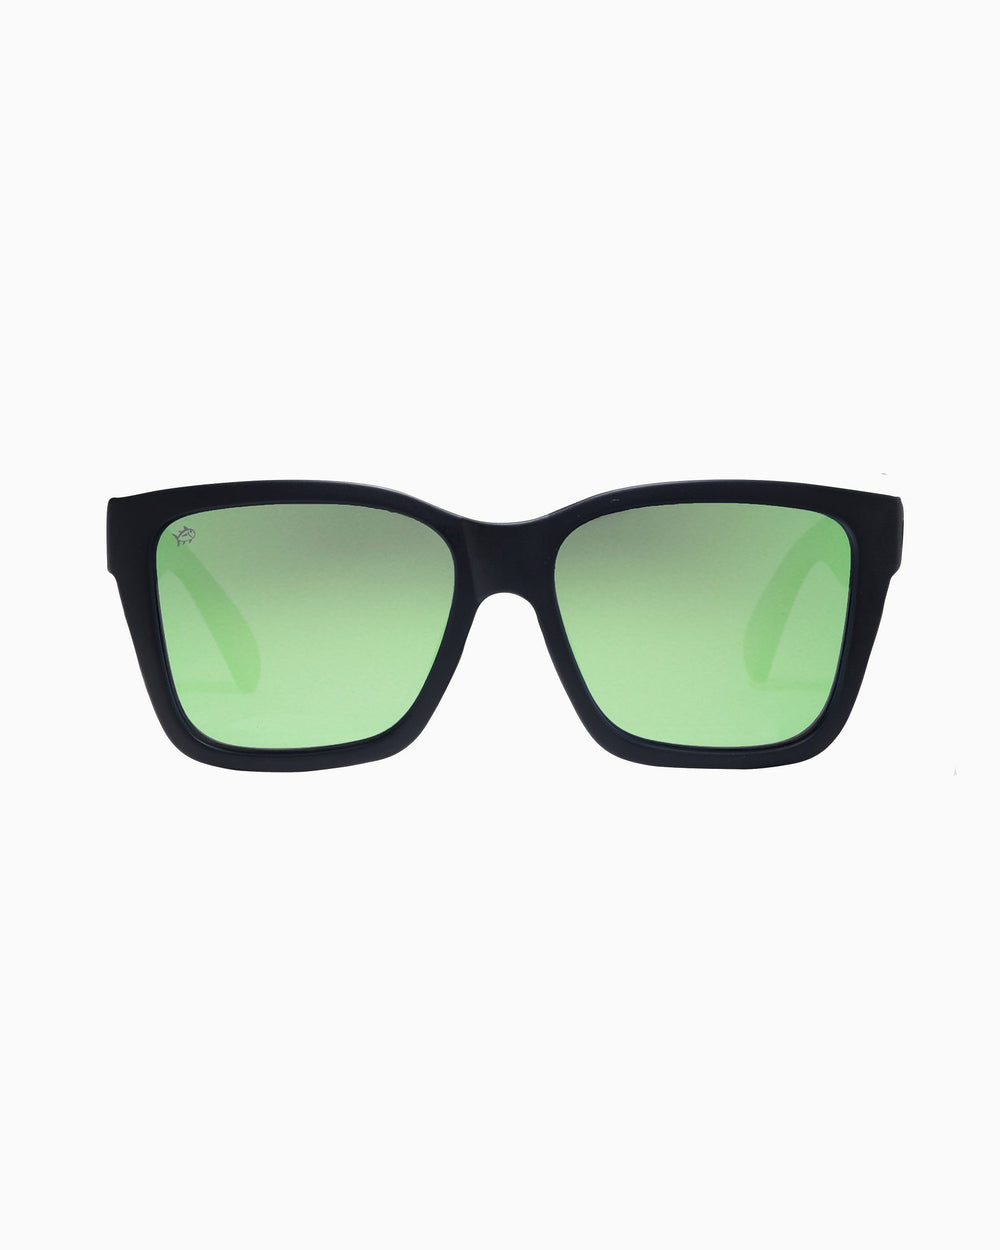 The front of the Rheos Edistos Sunglasses by Southern Tide - Gunmetal Emerald